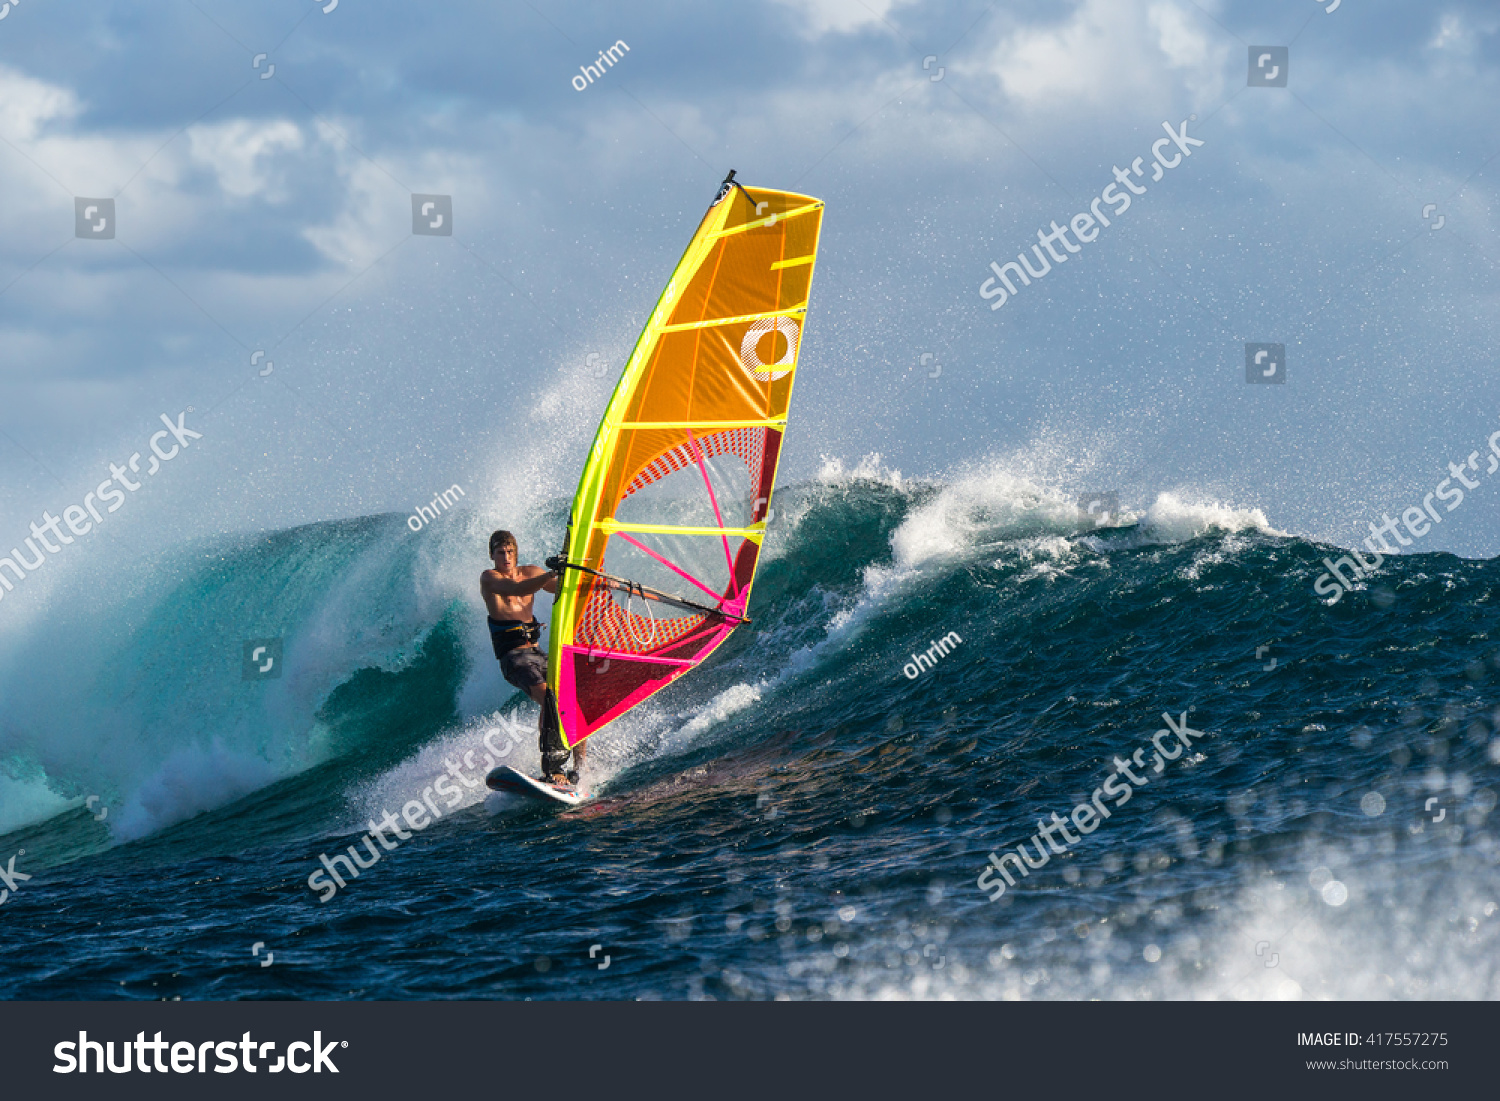 https://wuwit.com/wp-content/uploads/2020/09/stock-photo-windsurfer-rides-among-the-huge-tubes-and-waves-of-the-indian-ocean-on-the-island-of-mauritius-417557275.jpg